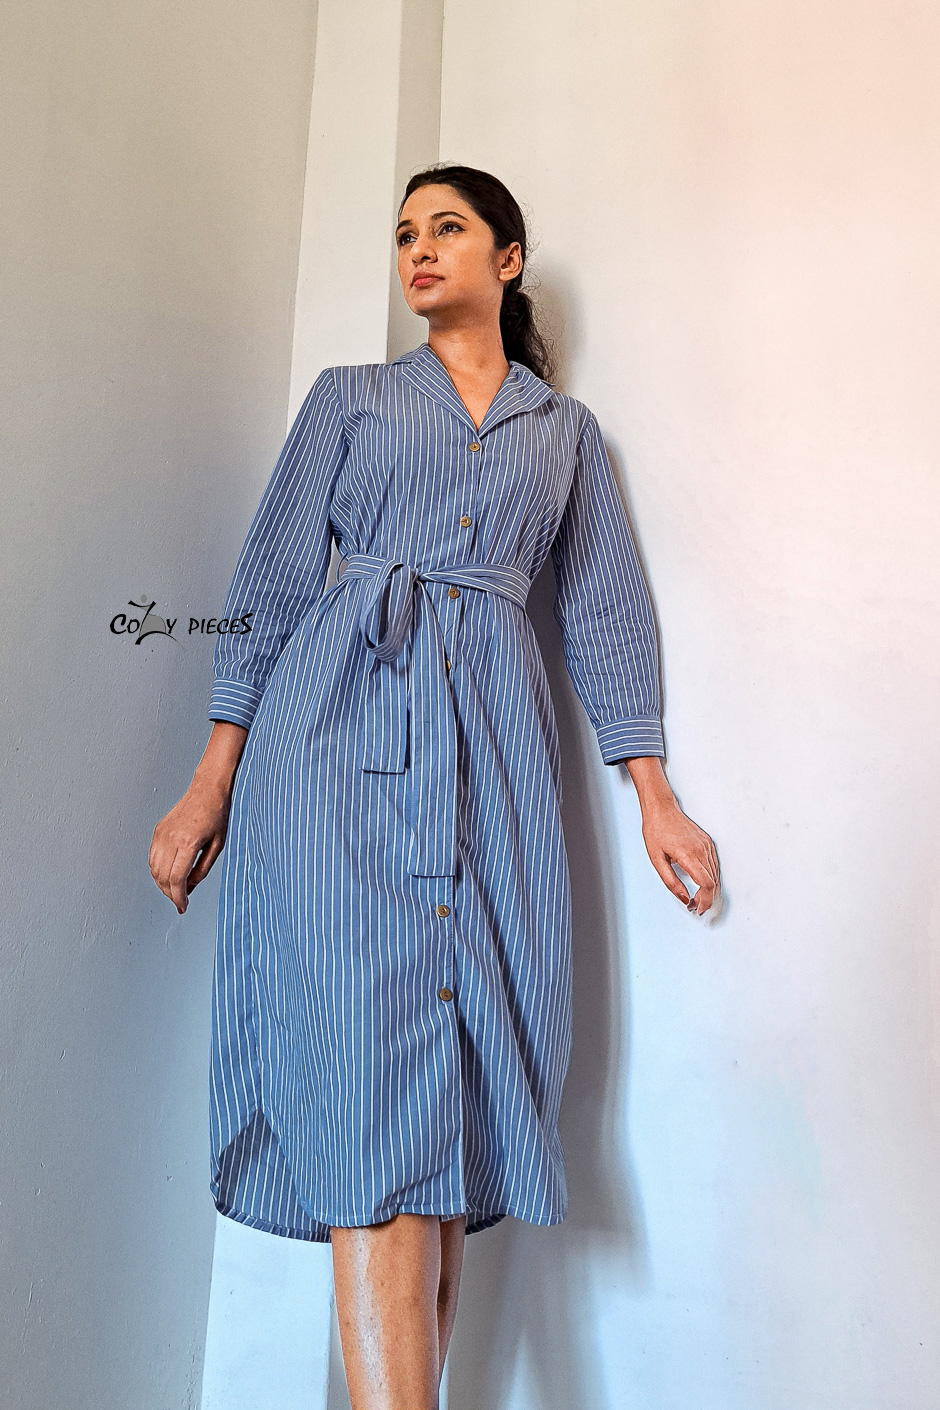 Circe- Midi Shirt Dress with Sash is made from Cotton and colour is Blue and White Stripes